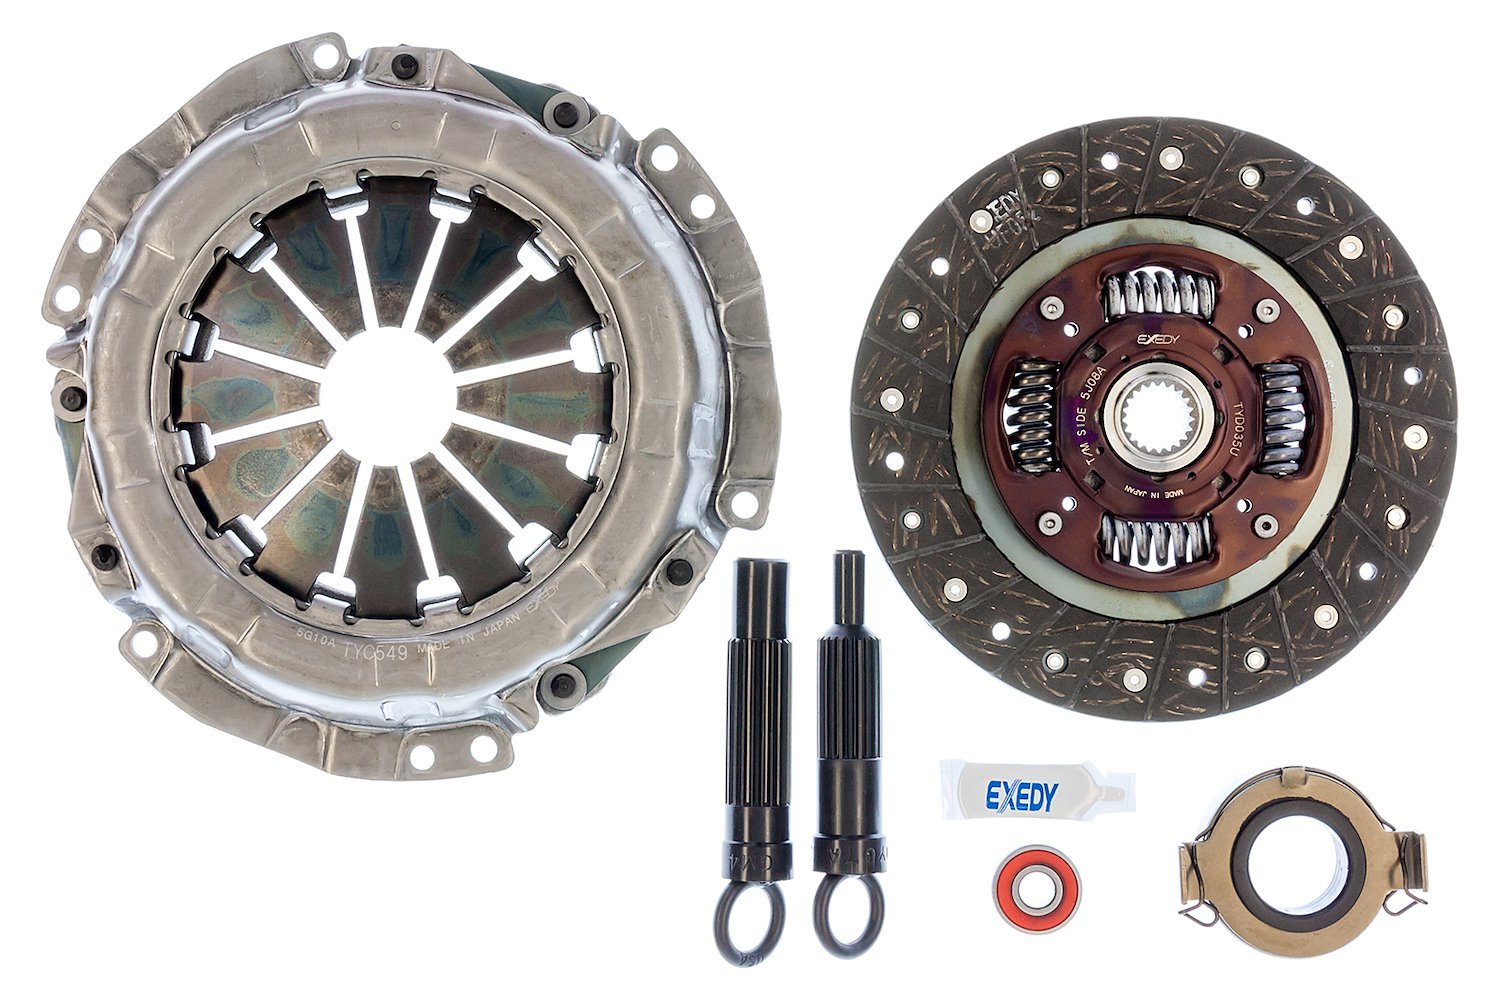 KTY03 OEM Replacement Transmission Clutch Kit, 1998-2002